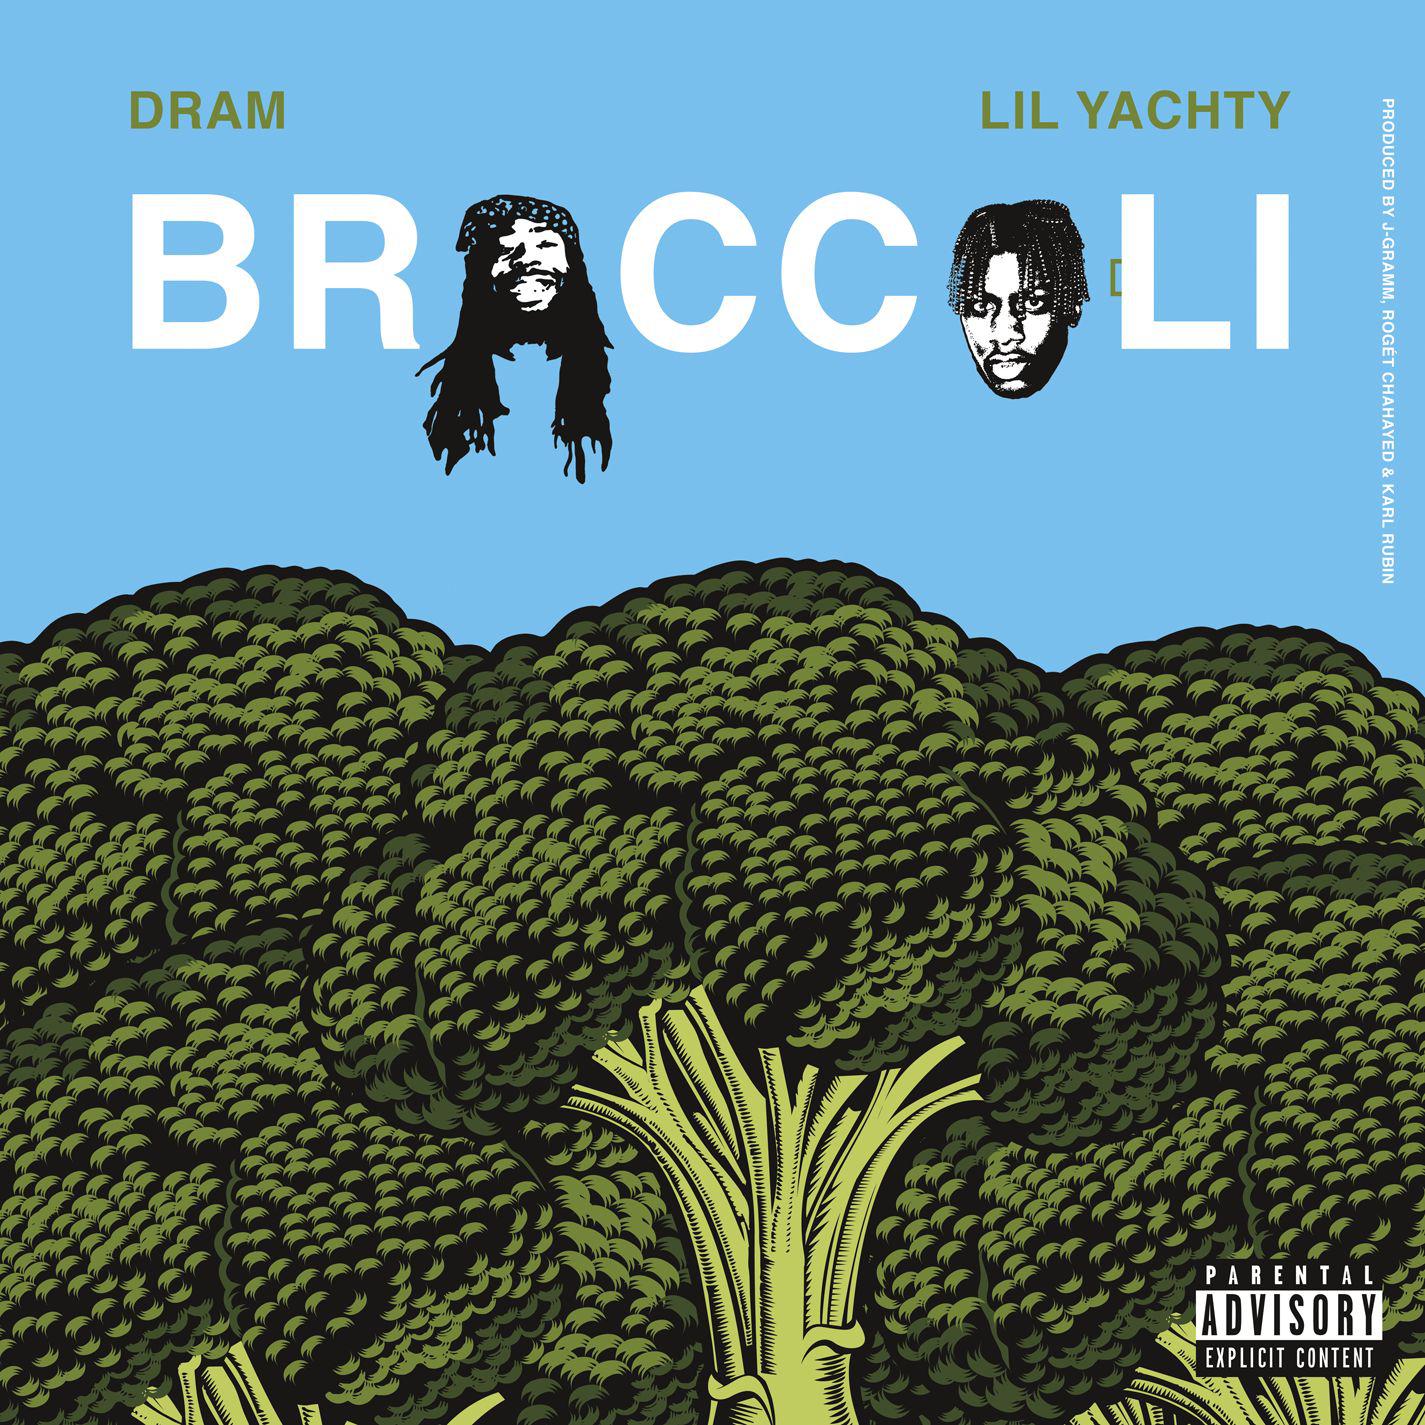 Big Baby D.R.A.M. – Broccoli feat. Lil Yachty (Remake)